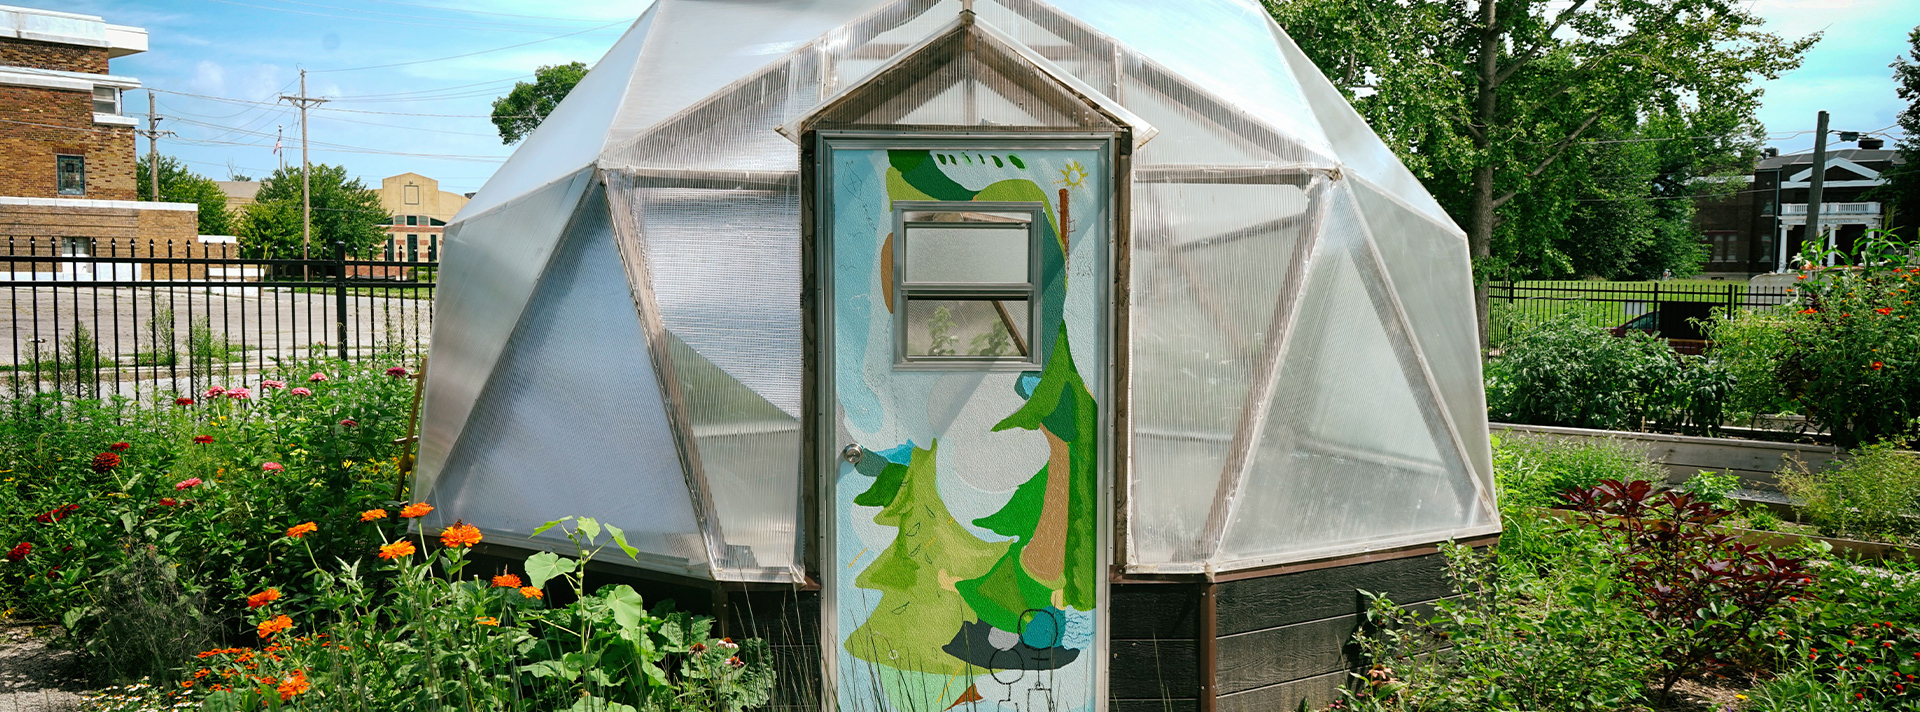 Abundance garden banner - photo of geodesic dome in Union garden. The garden is blooming with flowers and grasses and the door of the dome is painted with a bright, abstract nature scene.